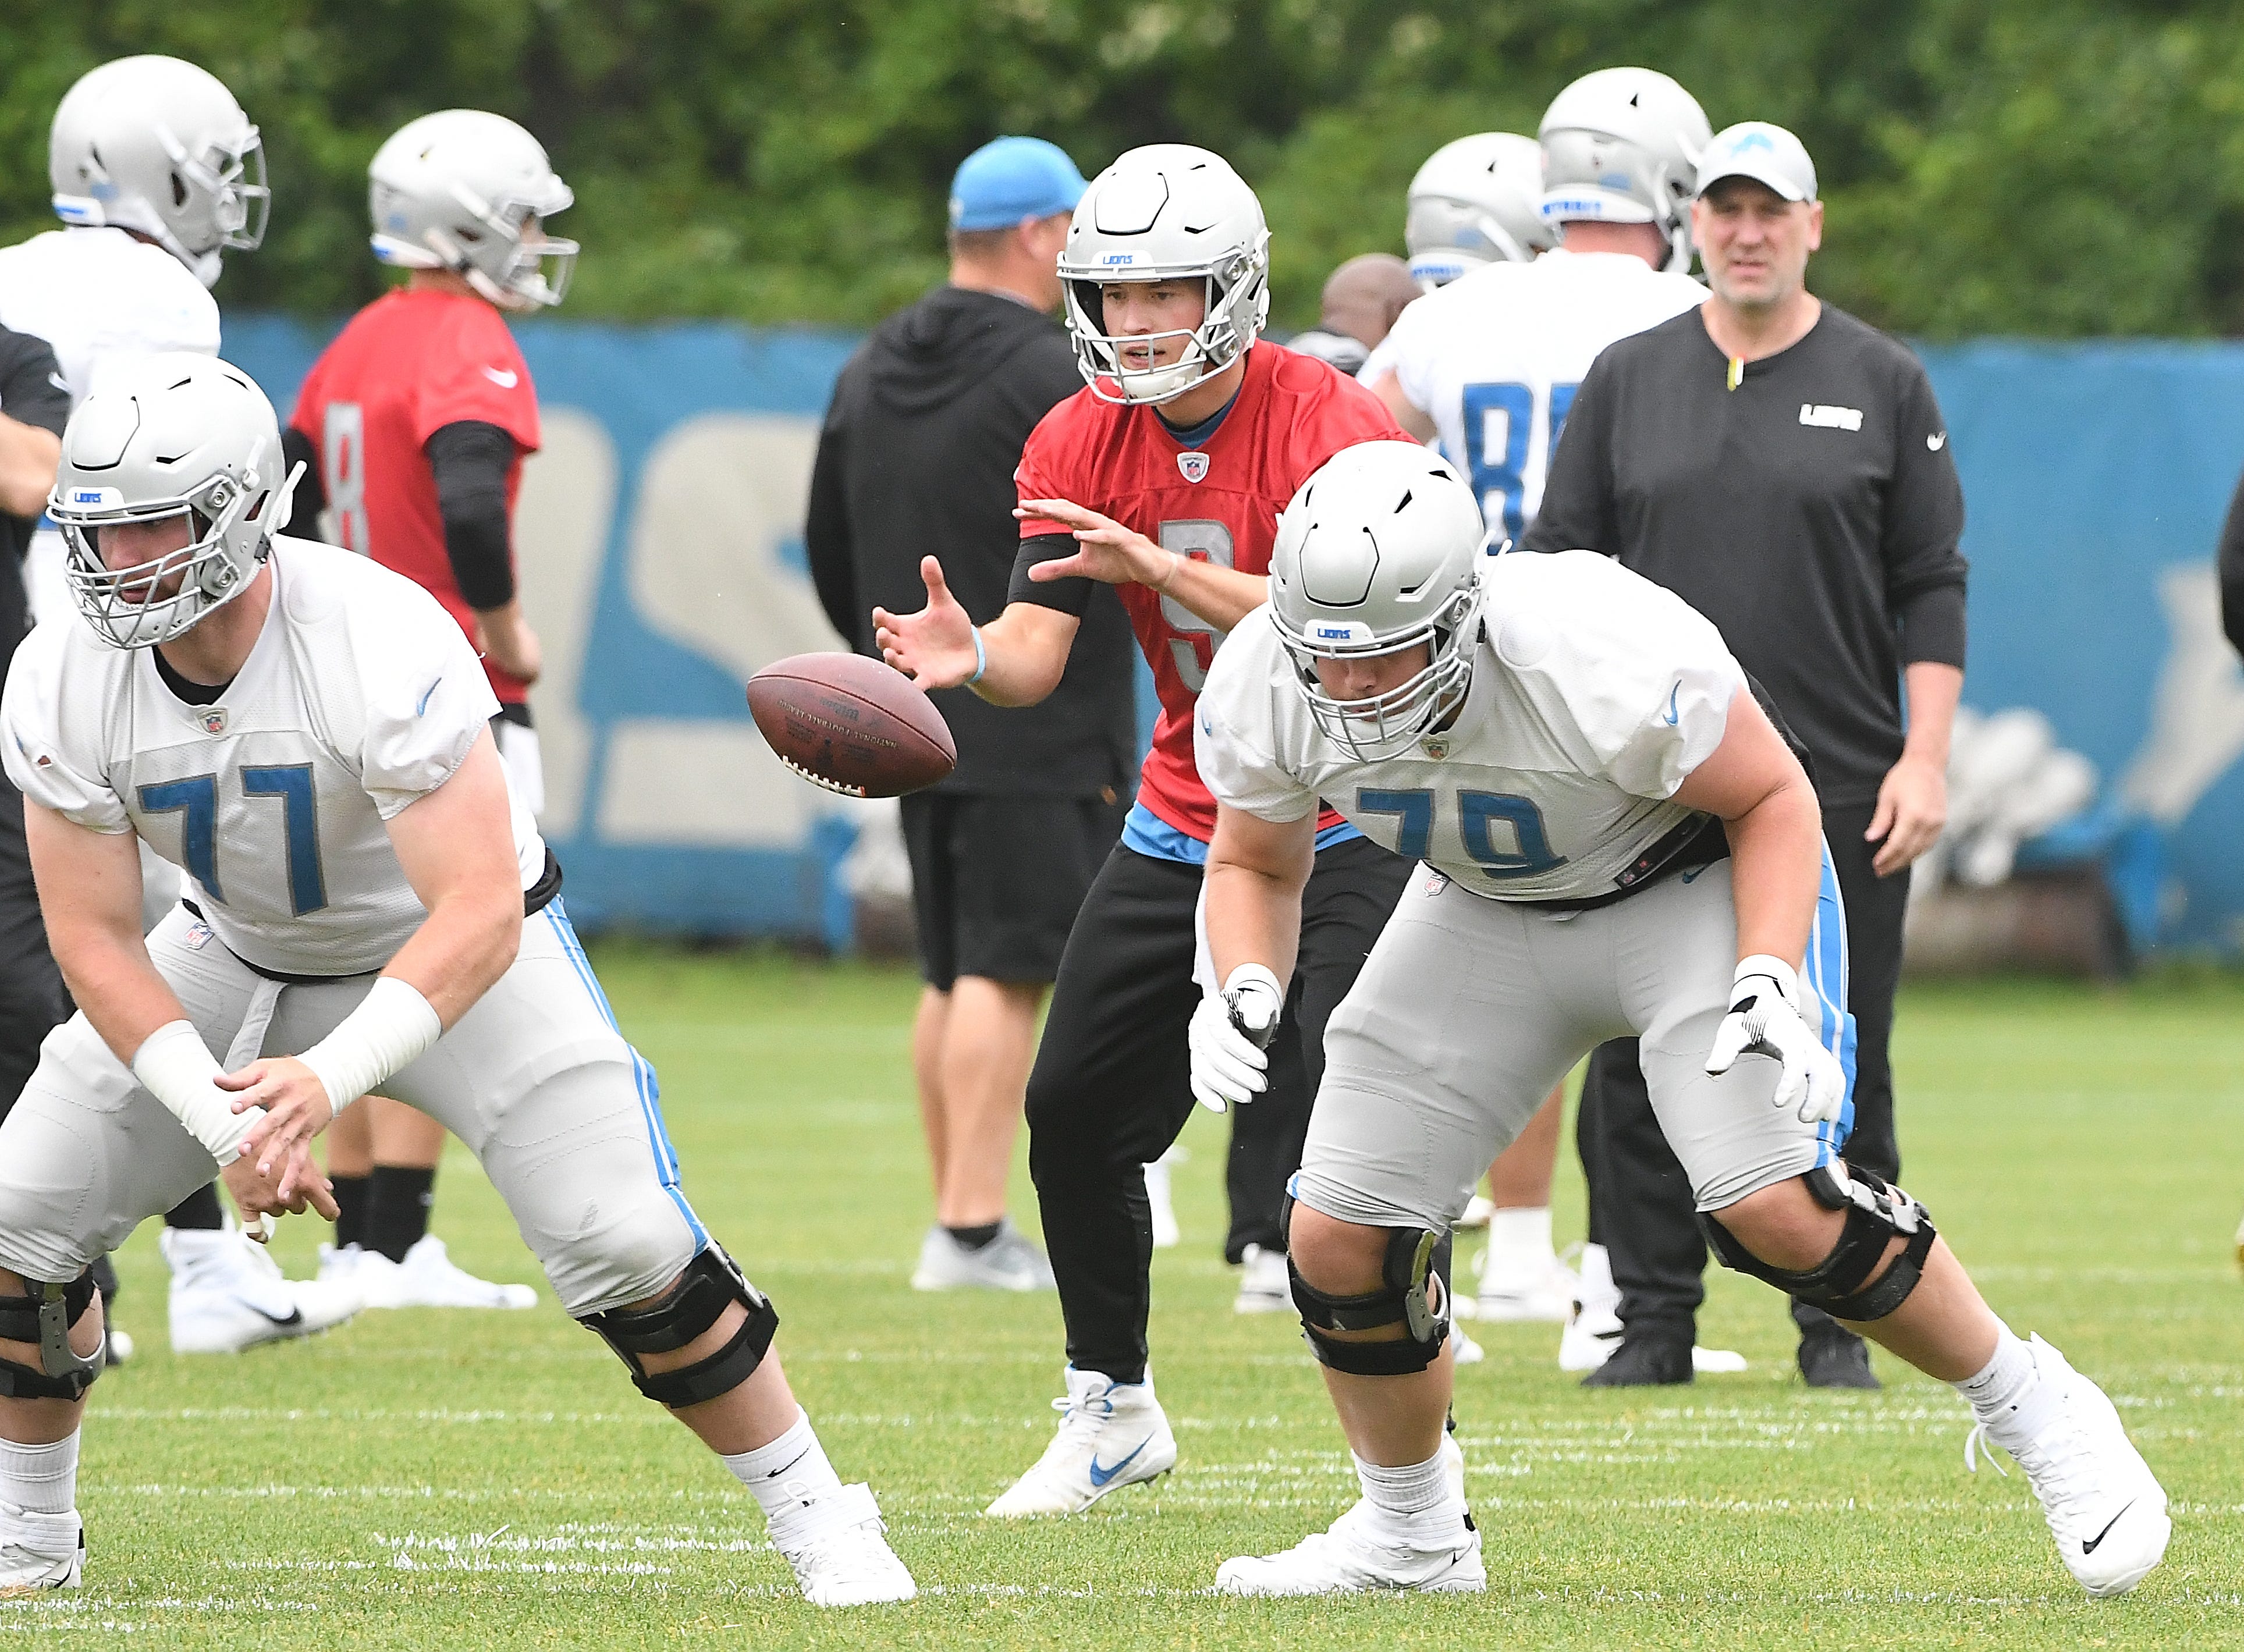 Lions quarterback Matthew Stafford in the pocket behind linemen Frank Ragnow and Kenny Wiggins during drills.